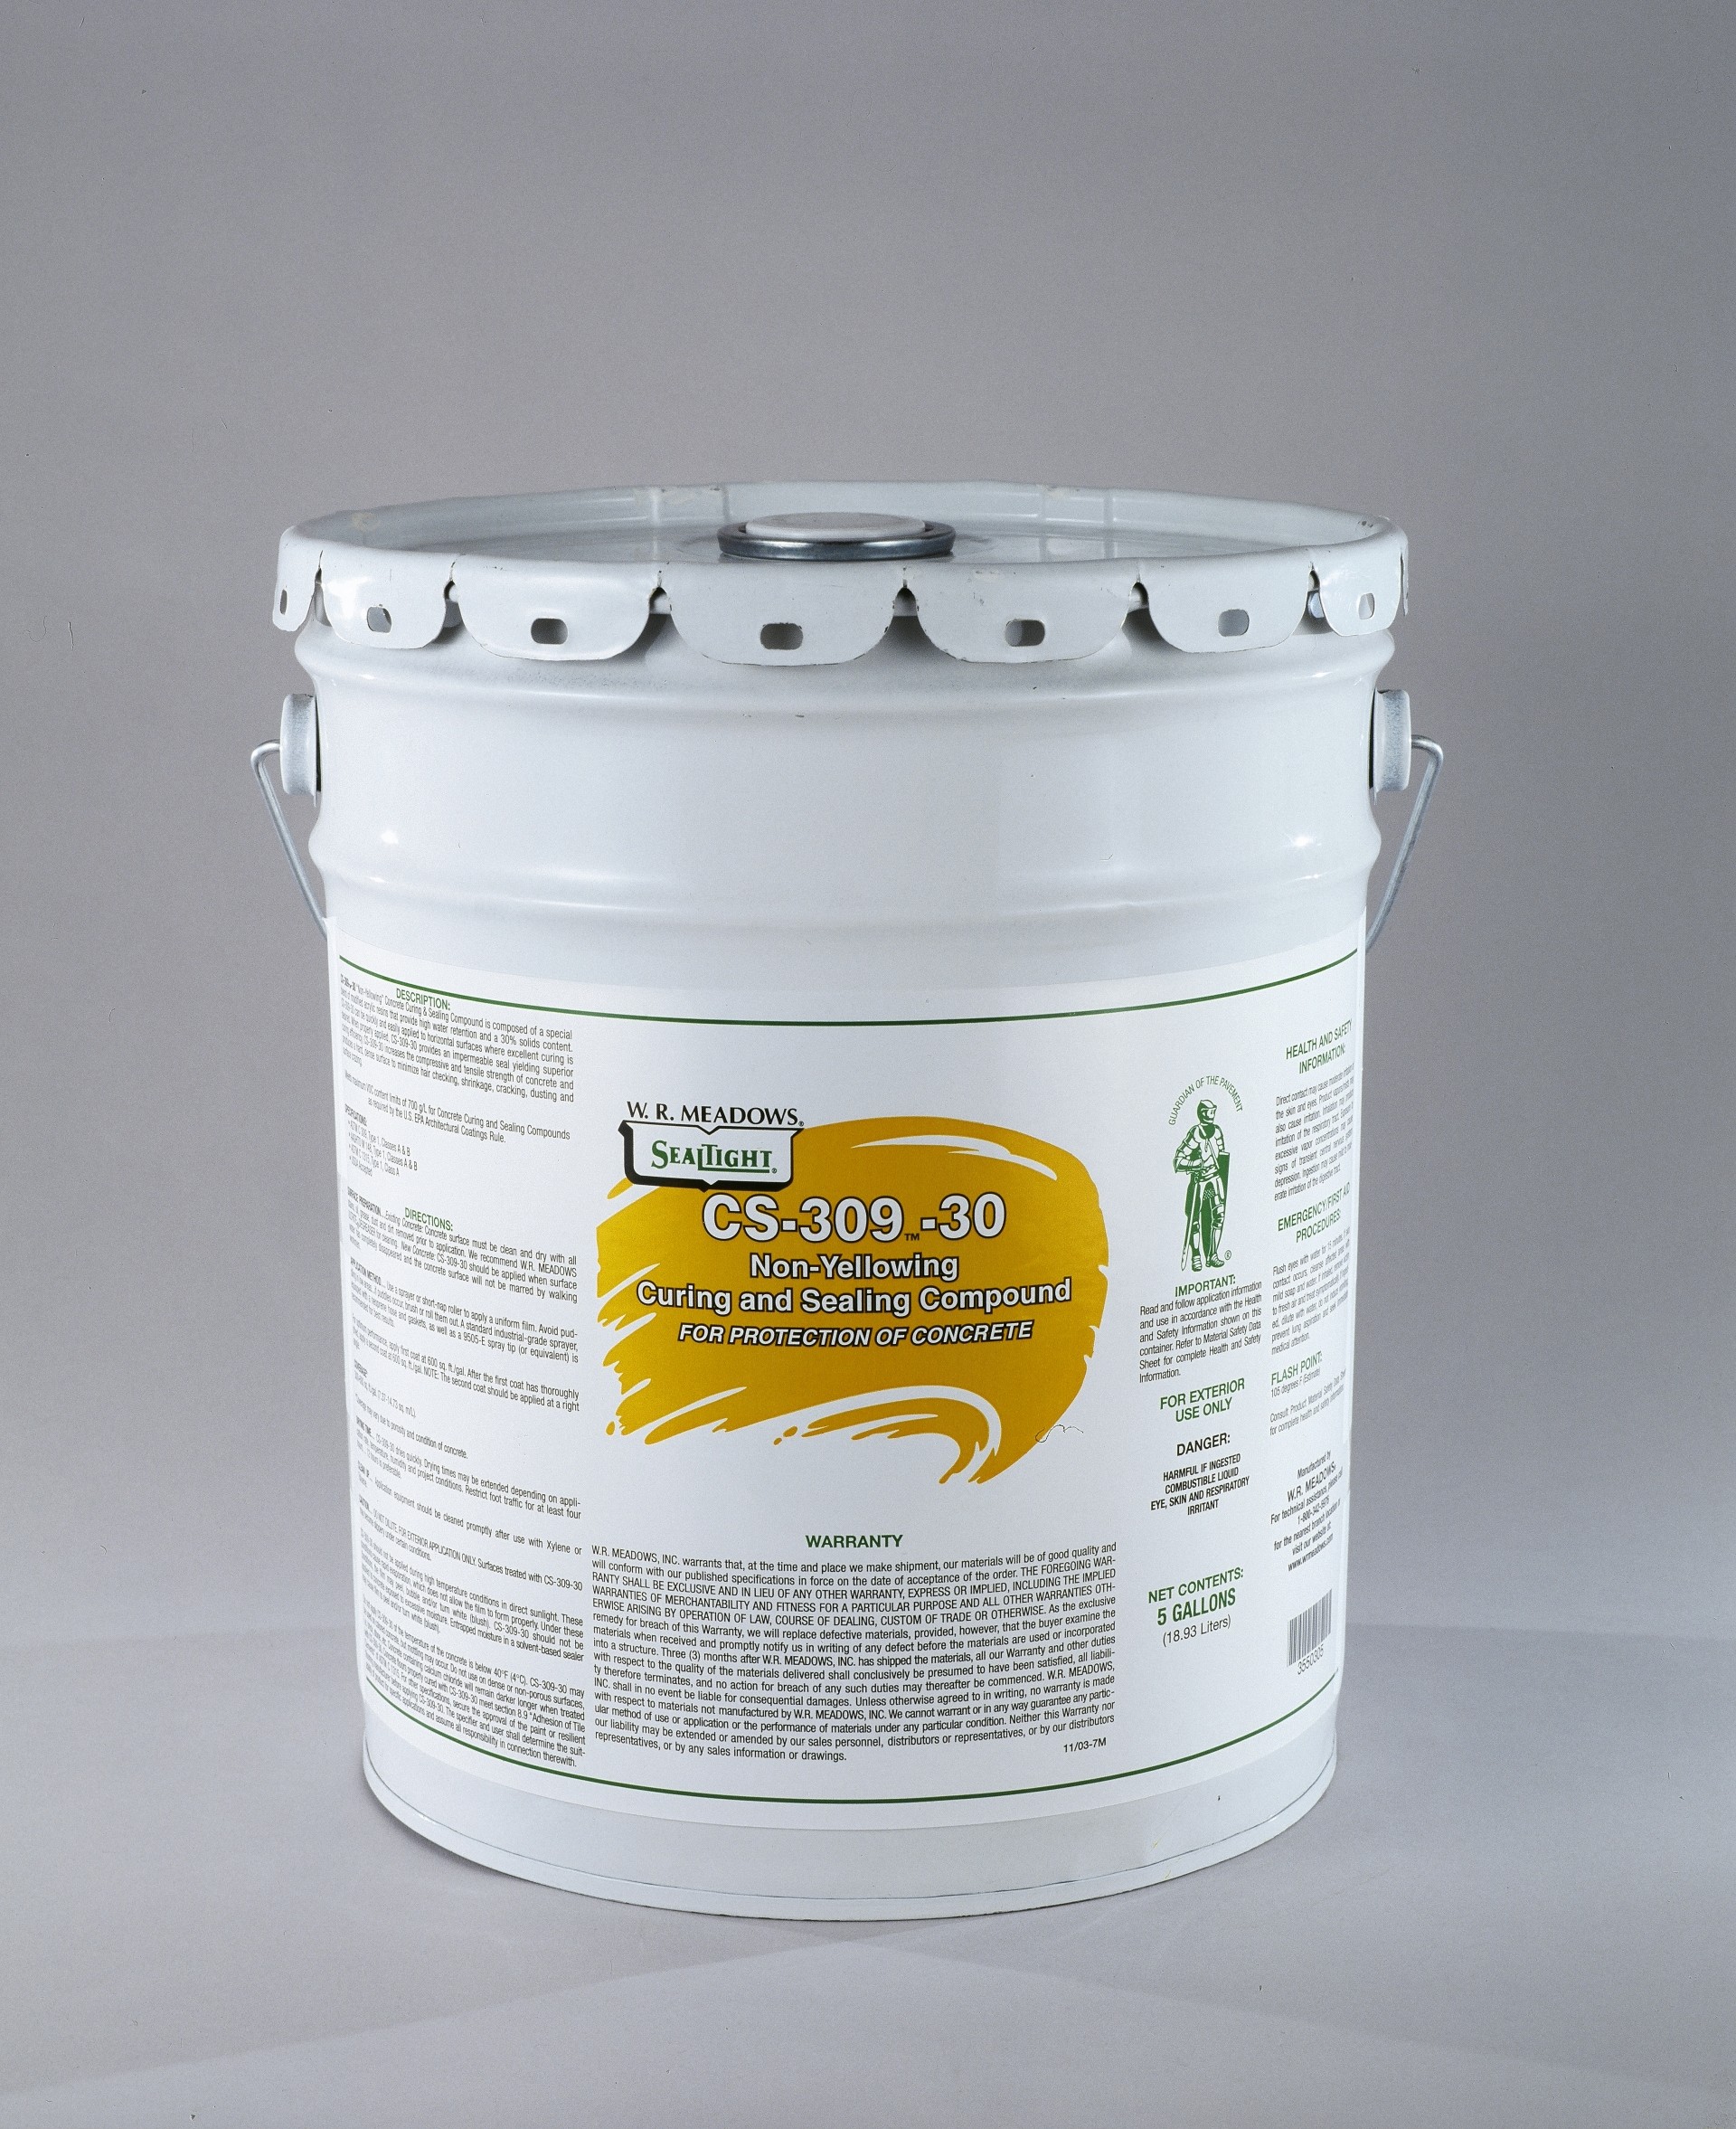 ACRYLIC NON-YELLOWING CURING AND SEALING COMPOUND SB30 5 GALLON